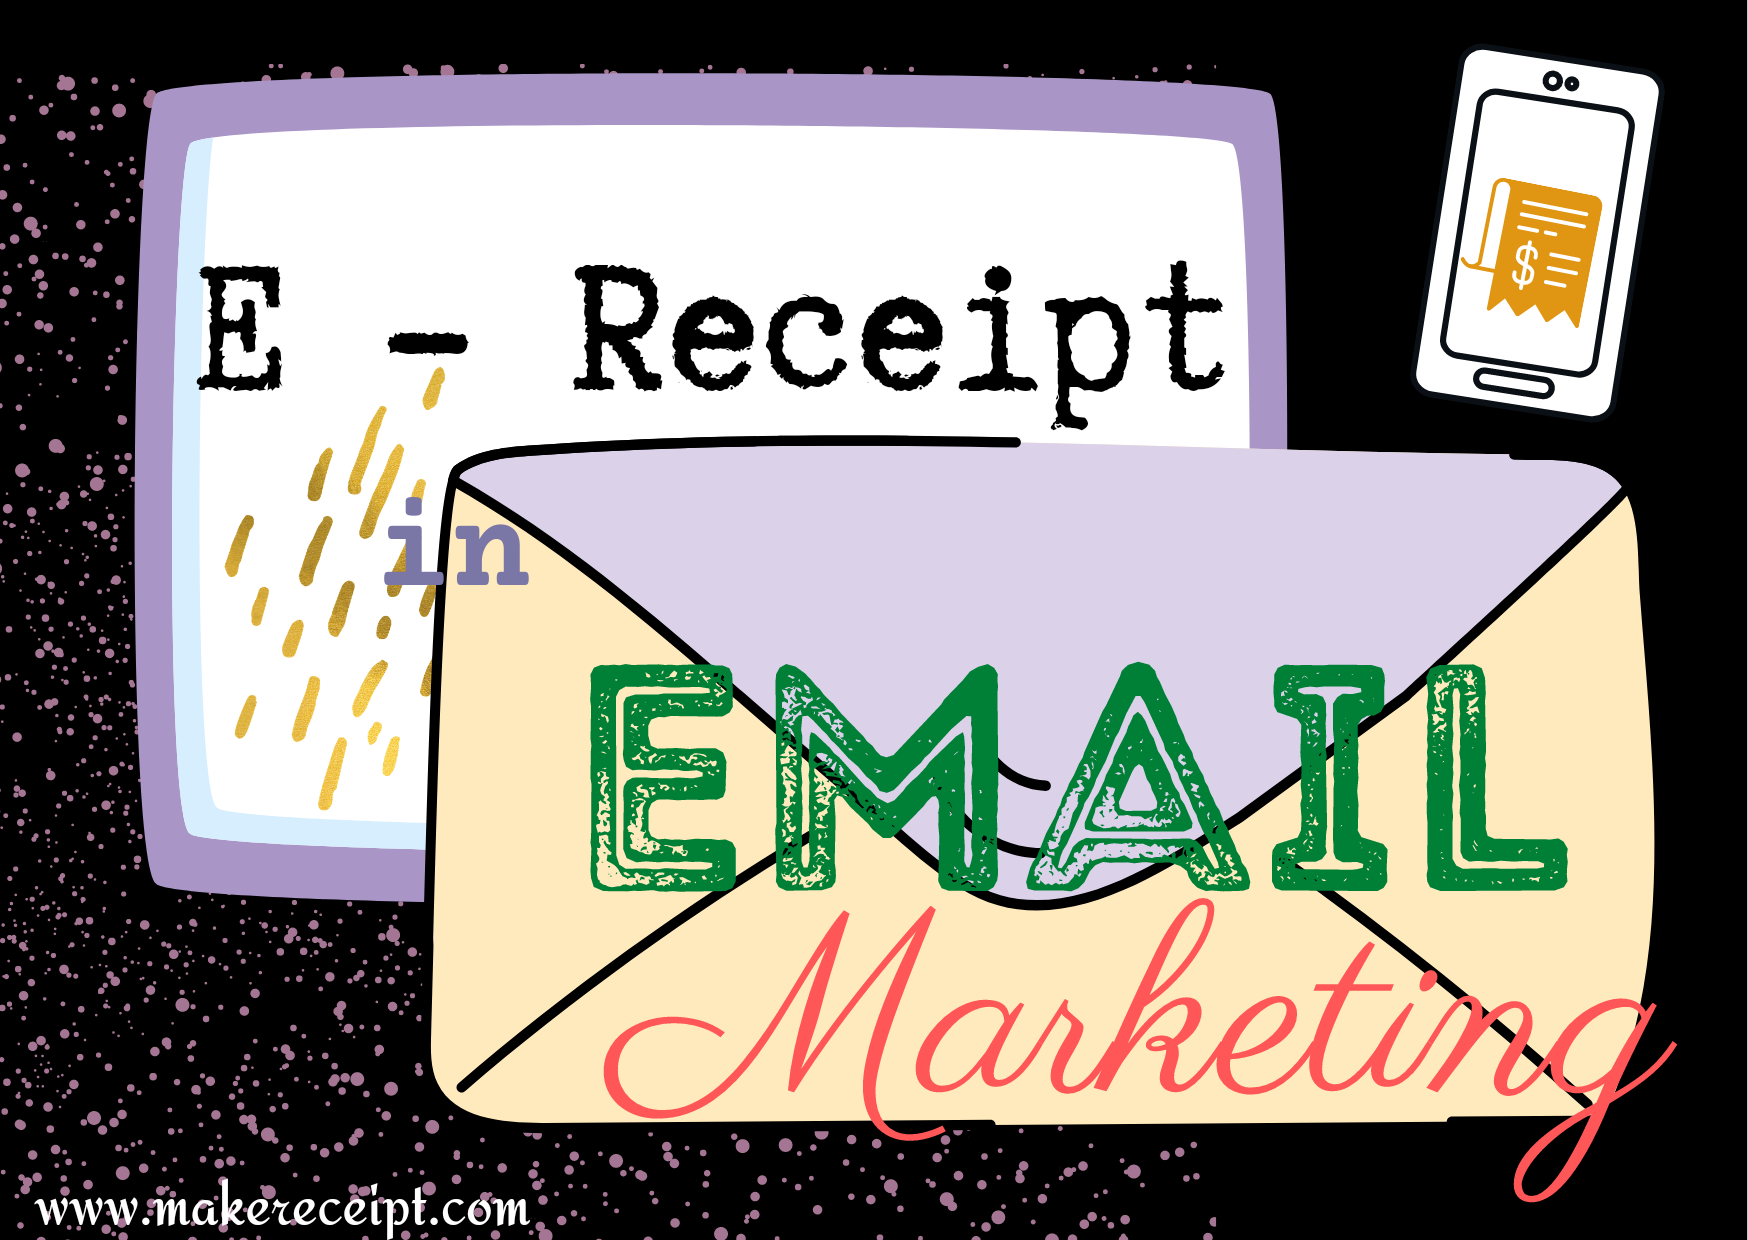 E-receipts in Email Marketing